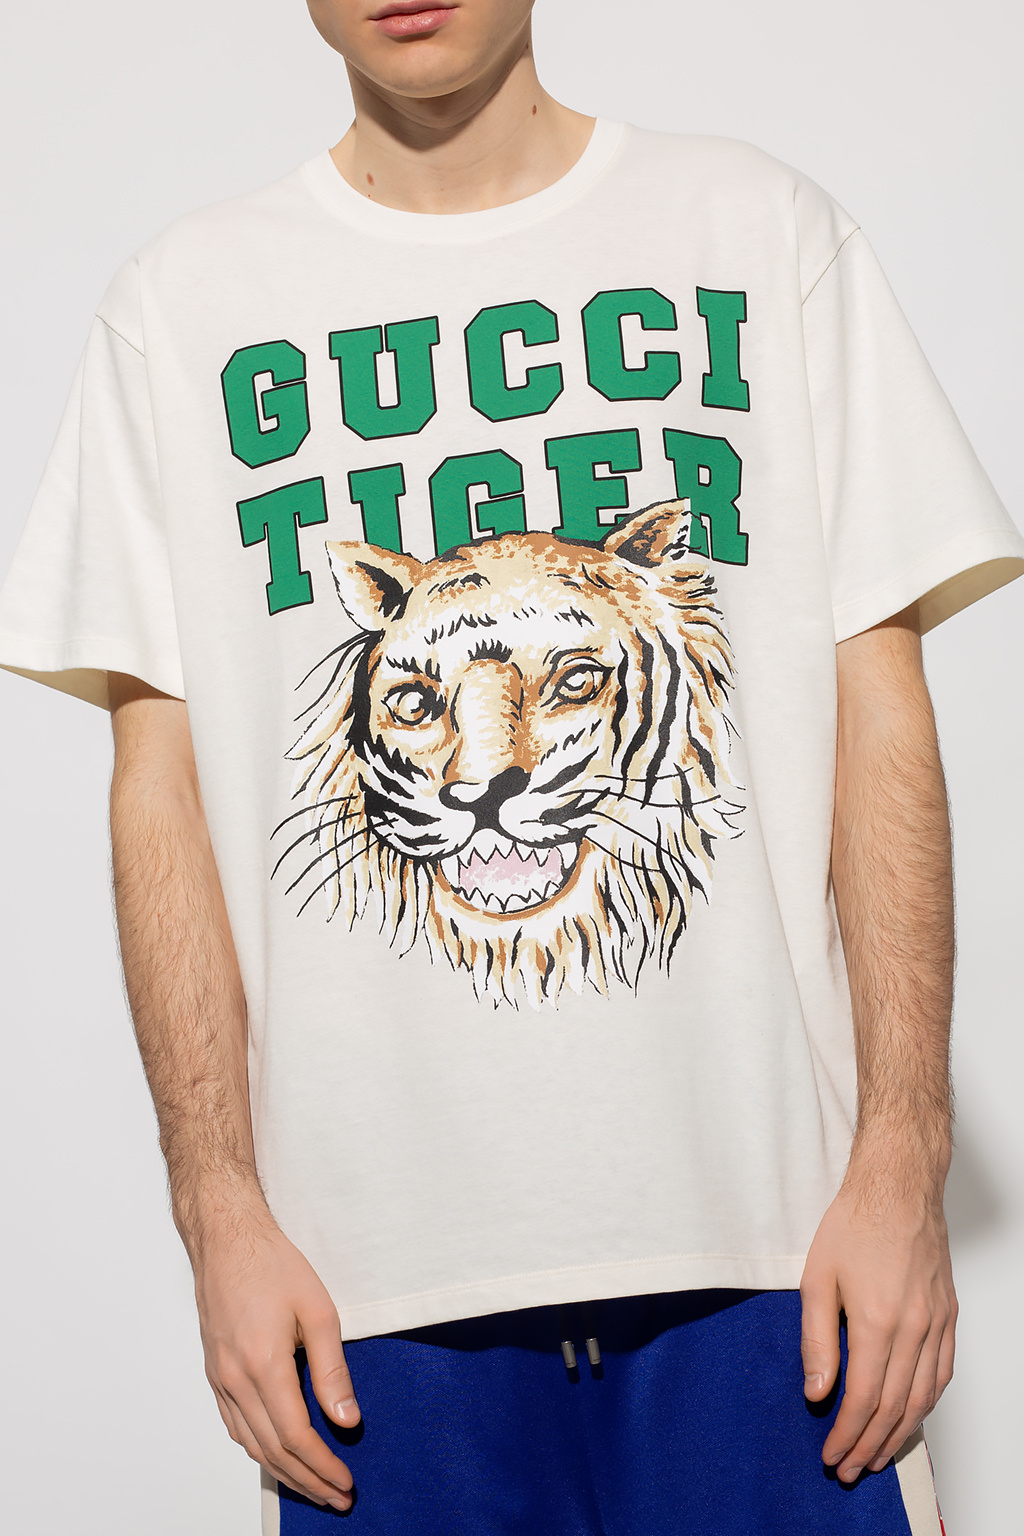 oversøisk Andre steder lavendel Gucci Printed T-shirt from the 'Gucci Tiger' collection | Men's Clothing |  Vitkac